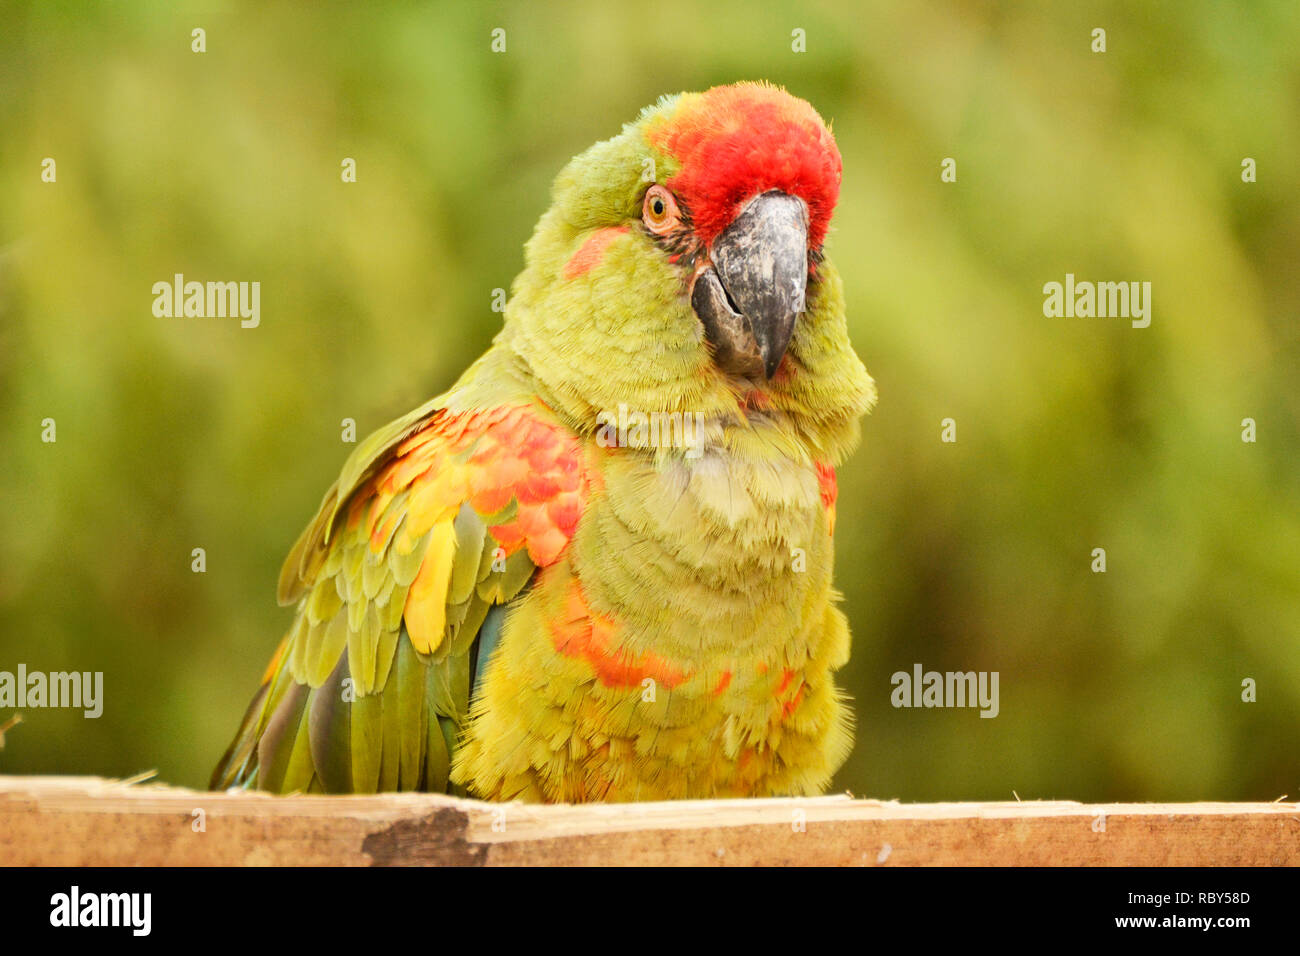 Red Crowned (green cheeked) Amazon Parrot at South Lakes Safari Zoo, Cumbria, UK Stock Photo